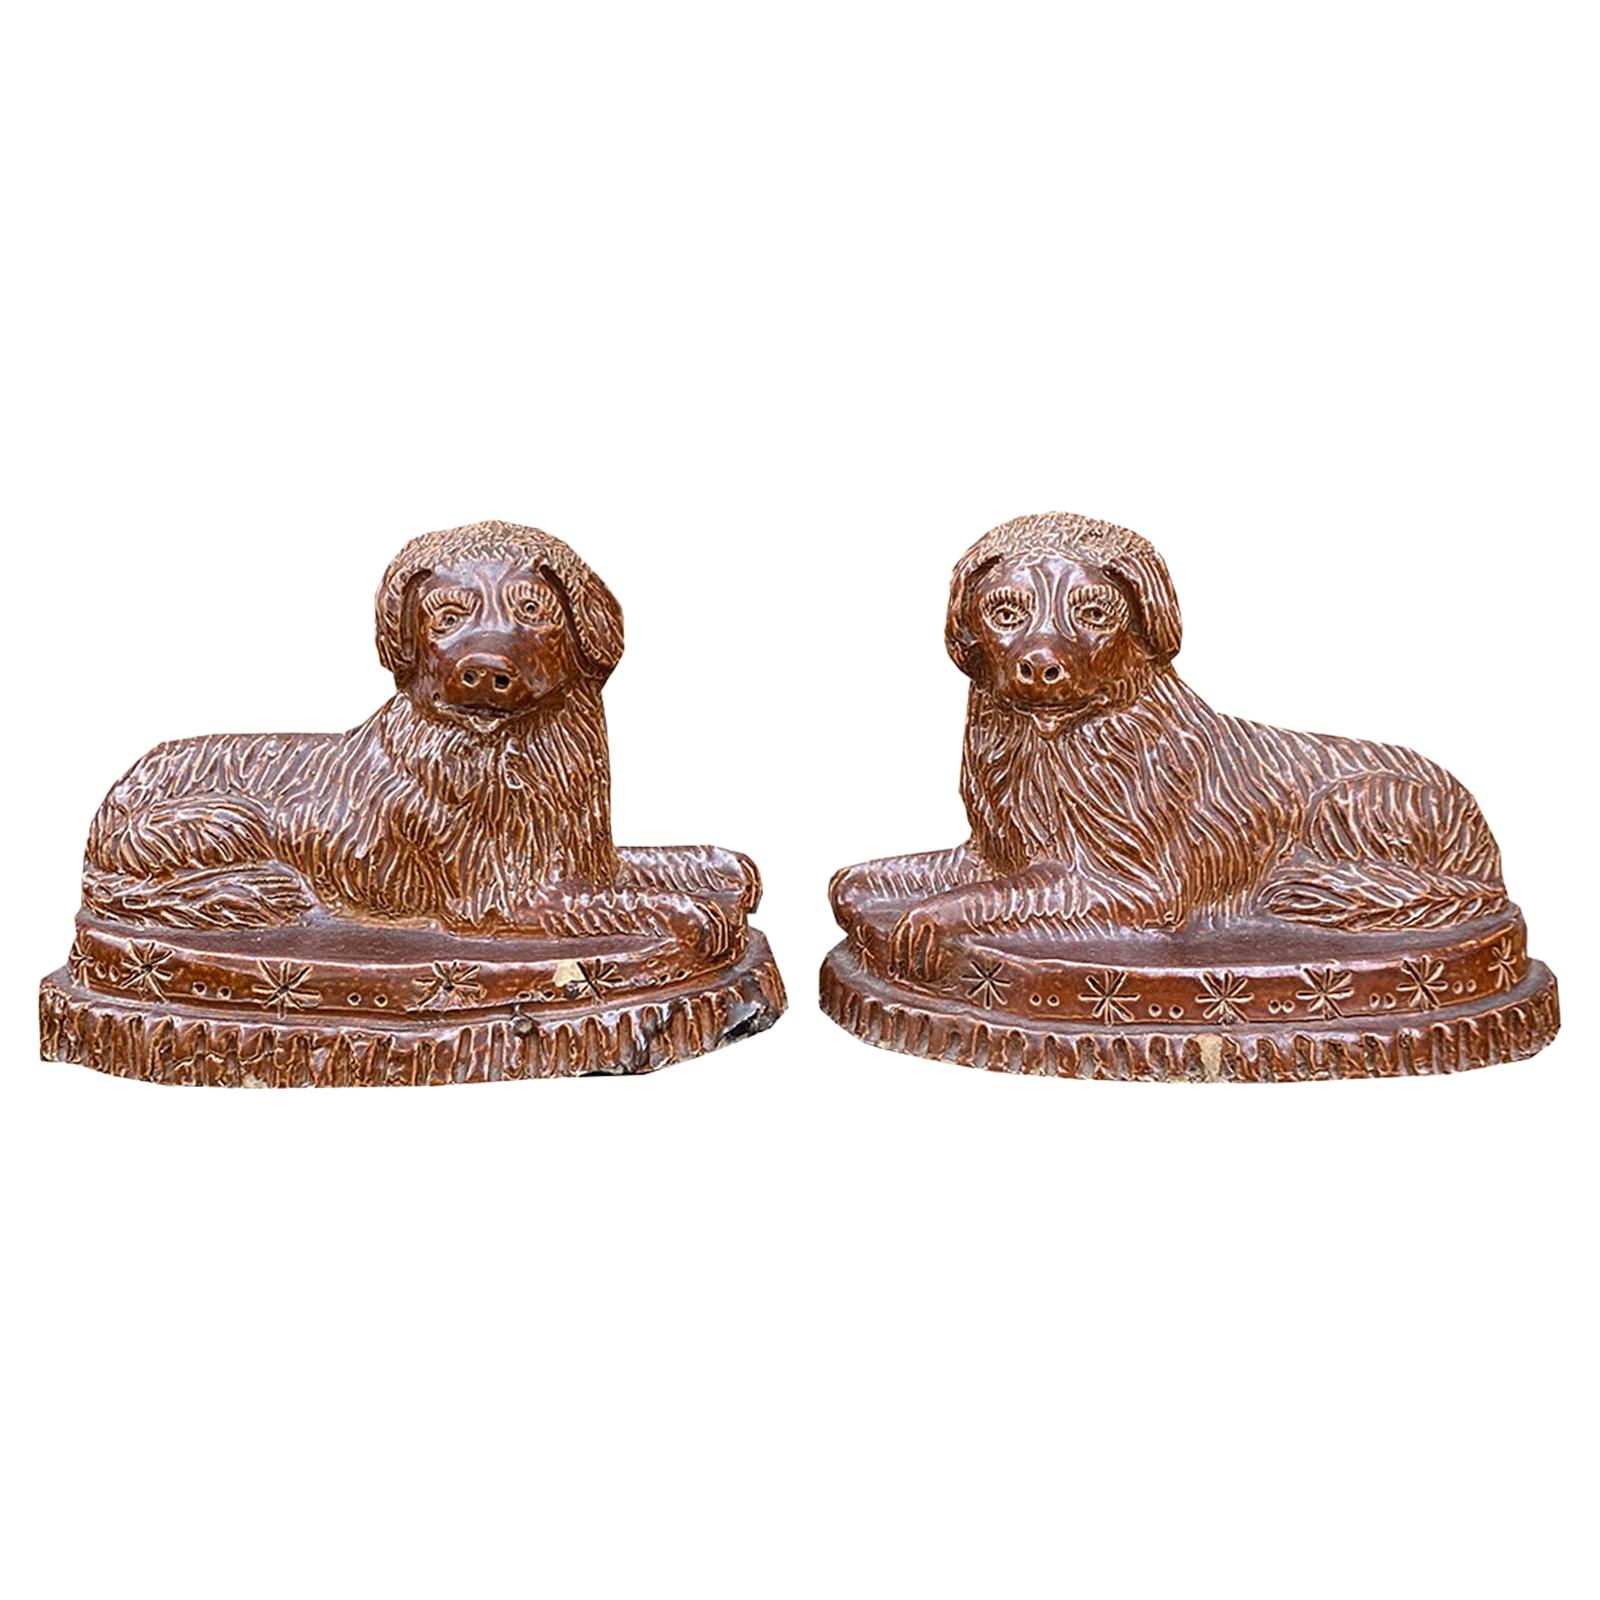 Pair of 19th Century Porcelain Dogs